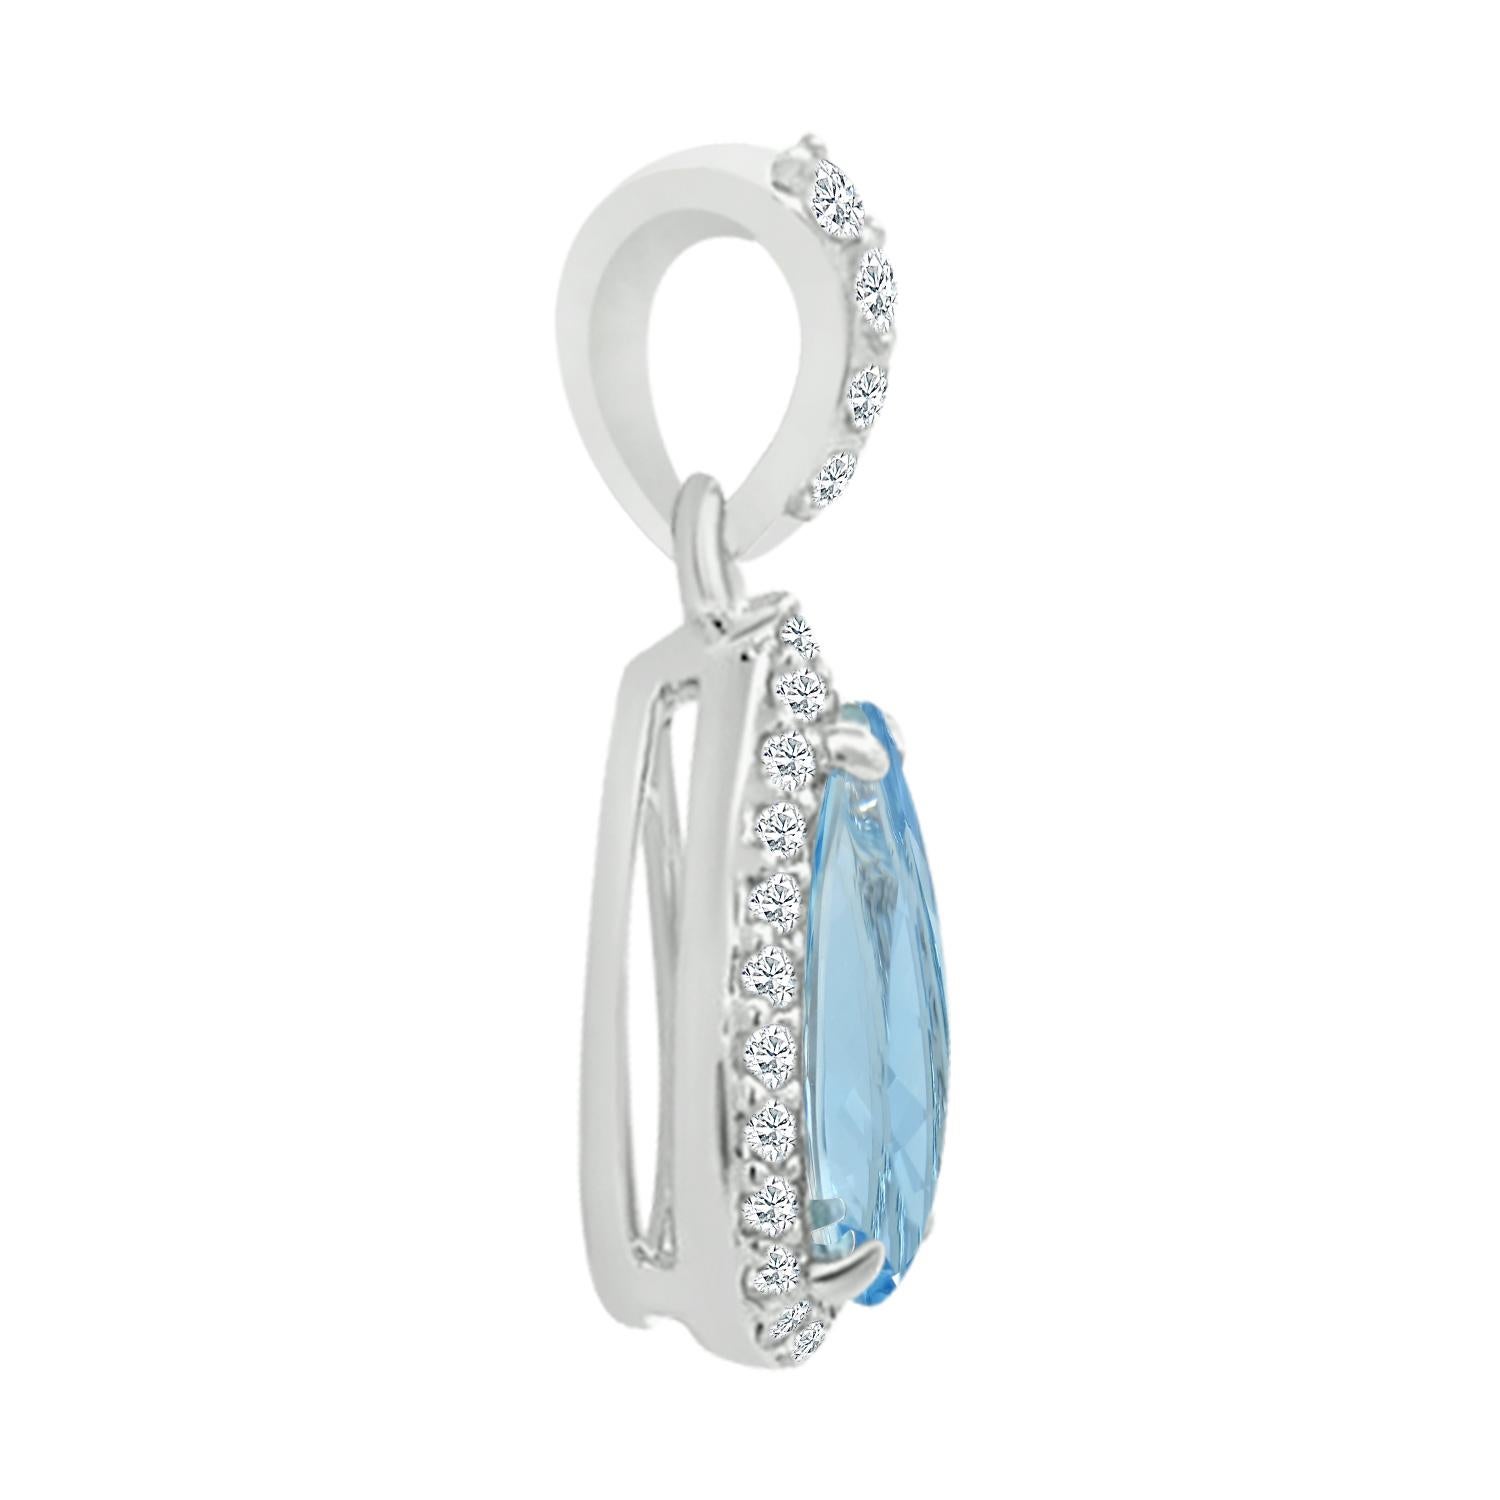 Entice Her With The Lovely Look Of This Ravishing Aquamarine Diamond Pendant.
This Pendant Is Styled Glinting 14K White Gold, This Pendant Features A Marvelous 9x6mm Pear Shape Aquamarine Nestled Among The Diamonds. 
This Stunning Piece Of Fine